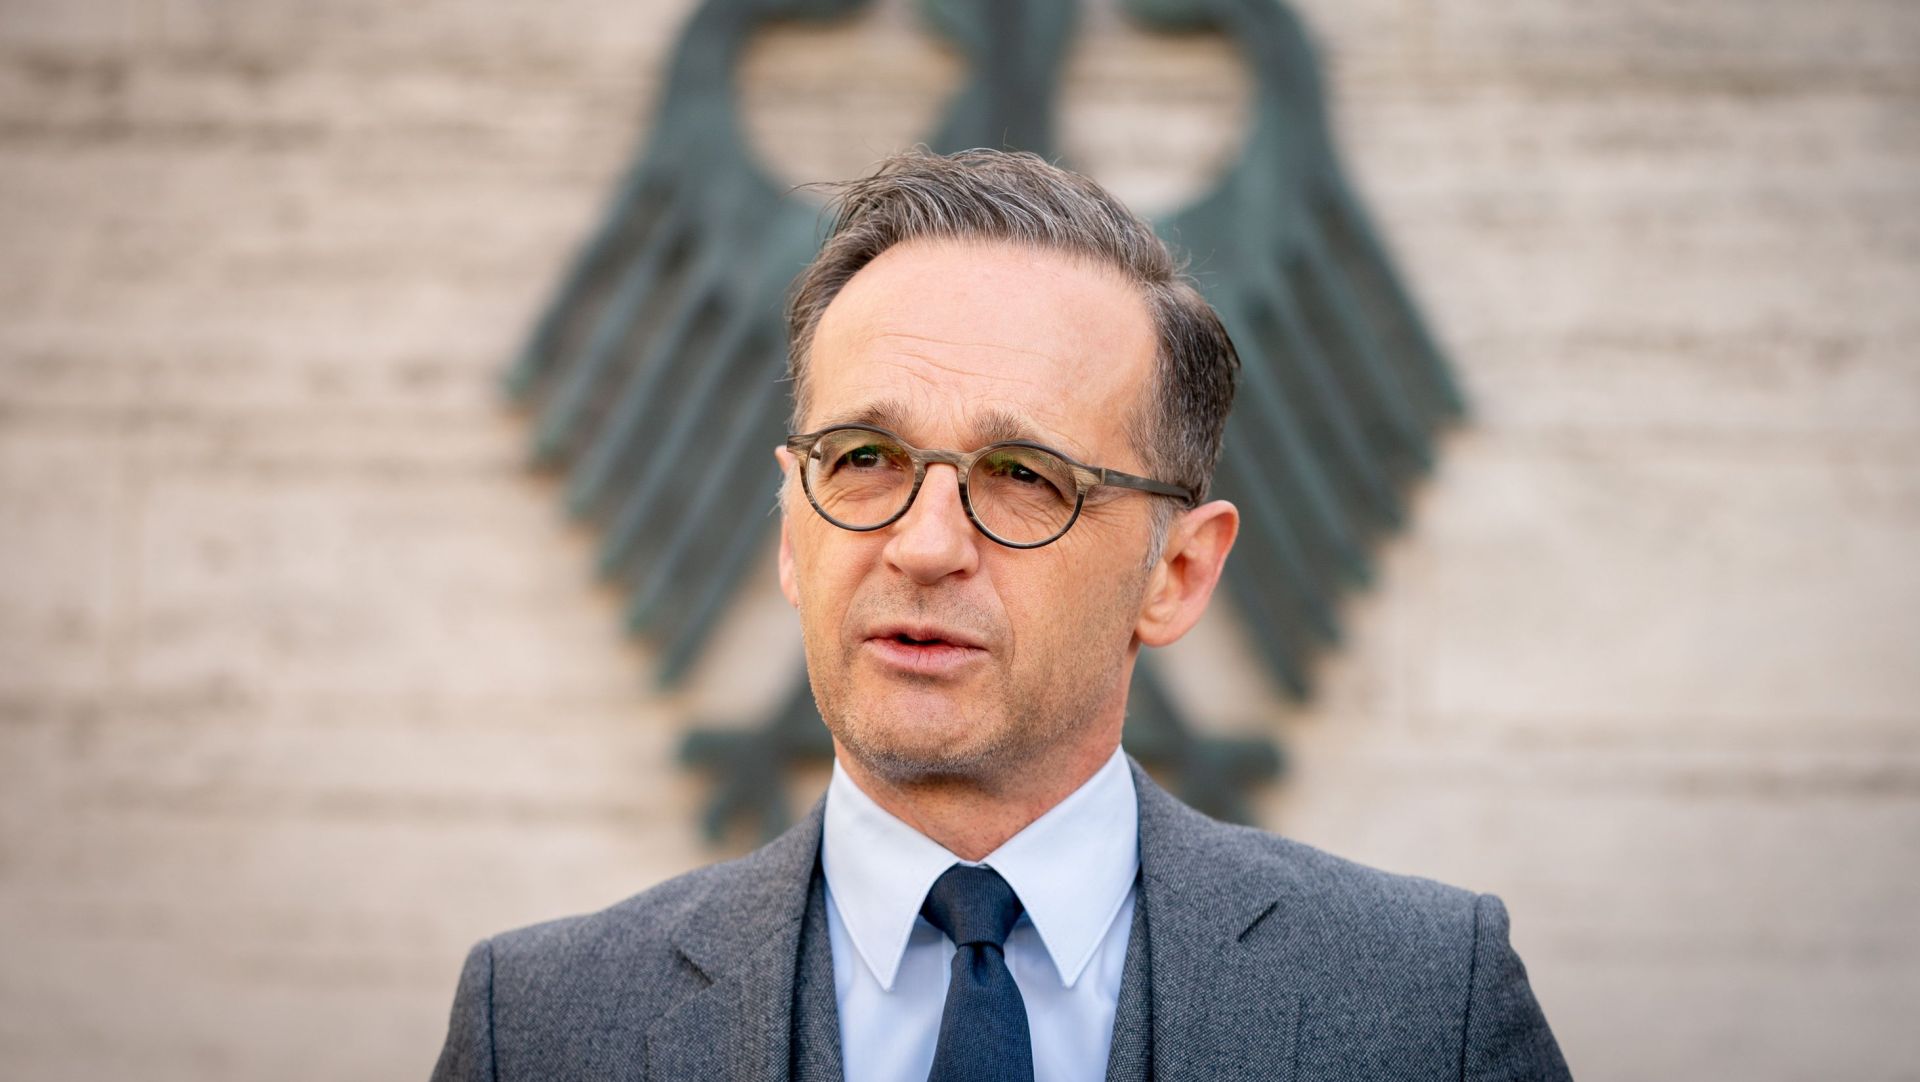 17 April 2020, Berlin: German Foreign Minister Heiko Maas speaks during a press conference on the status of the repatriation operations and the worldwide travel warnings amid the coronavirus pandemic. Photo: Kay Nietfeld/dpa